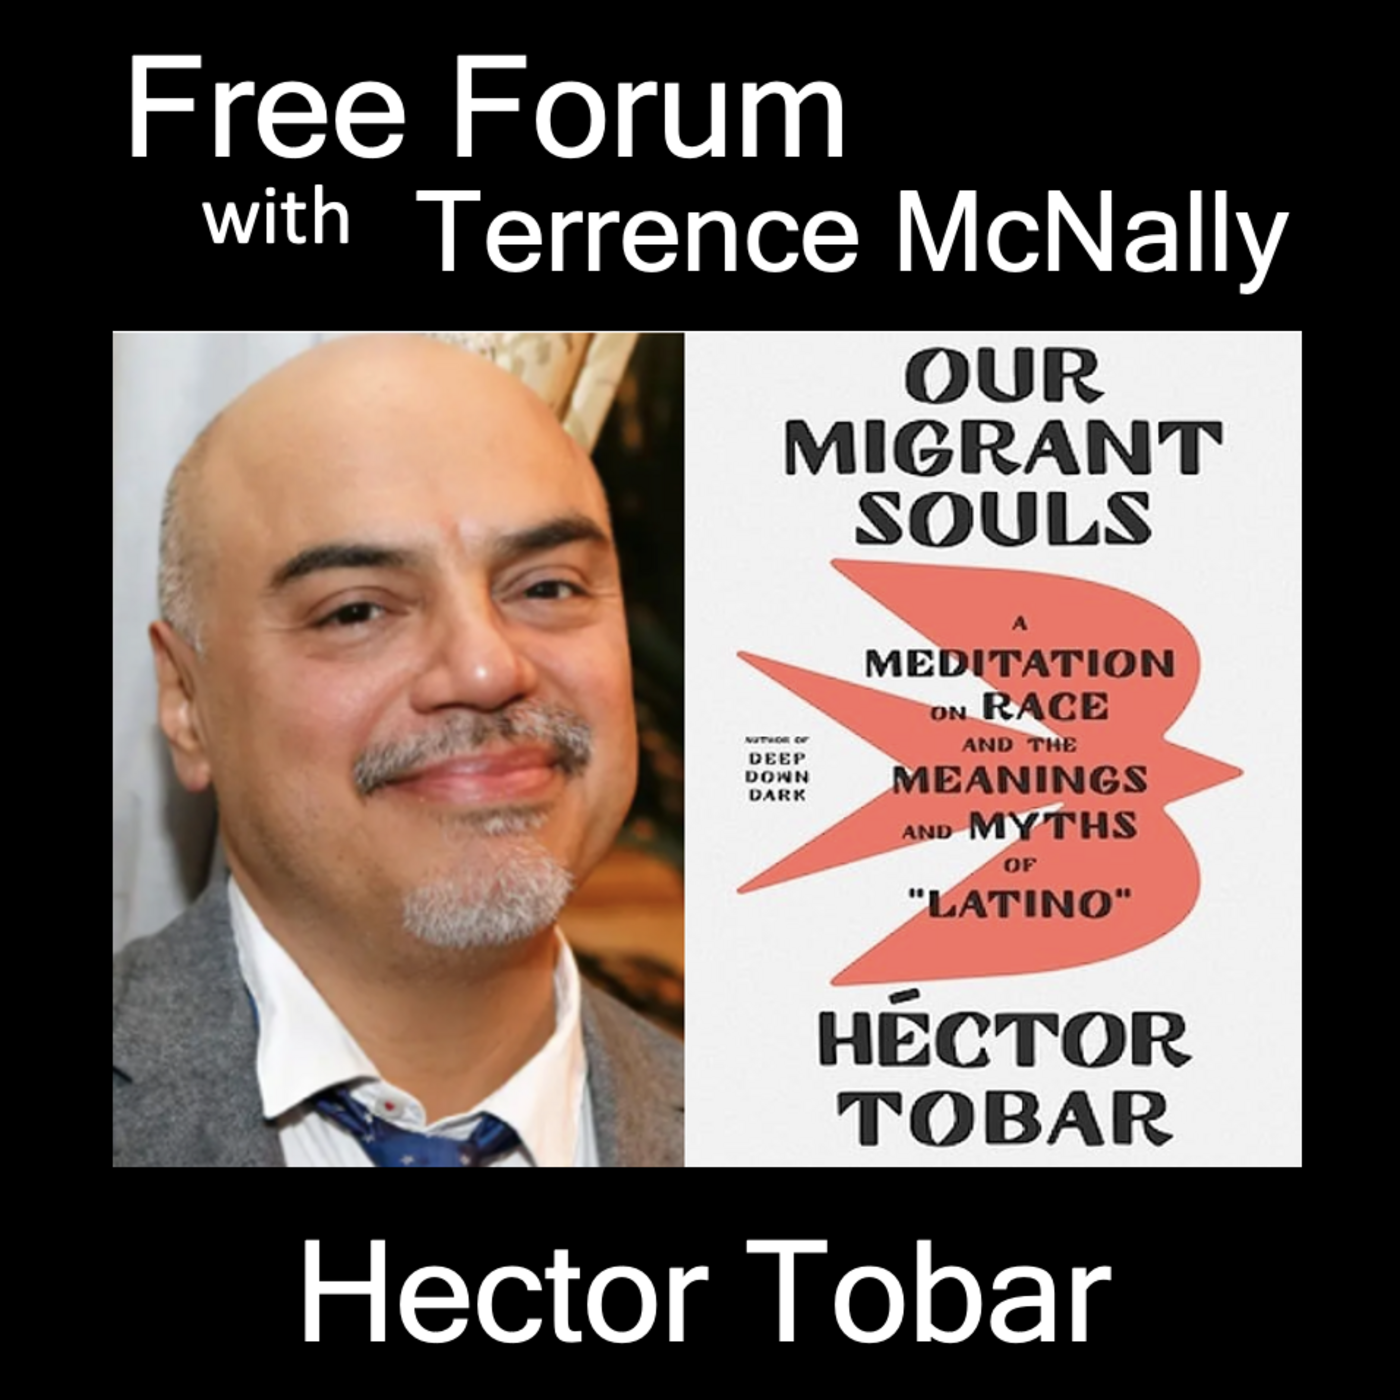 Episode 603: HECTOR TOBAR-OUR MIGRANT SOULS: A Meditation on Race and the Meanings and Myths of Latino